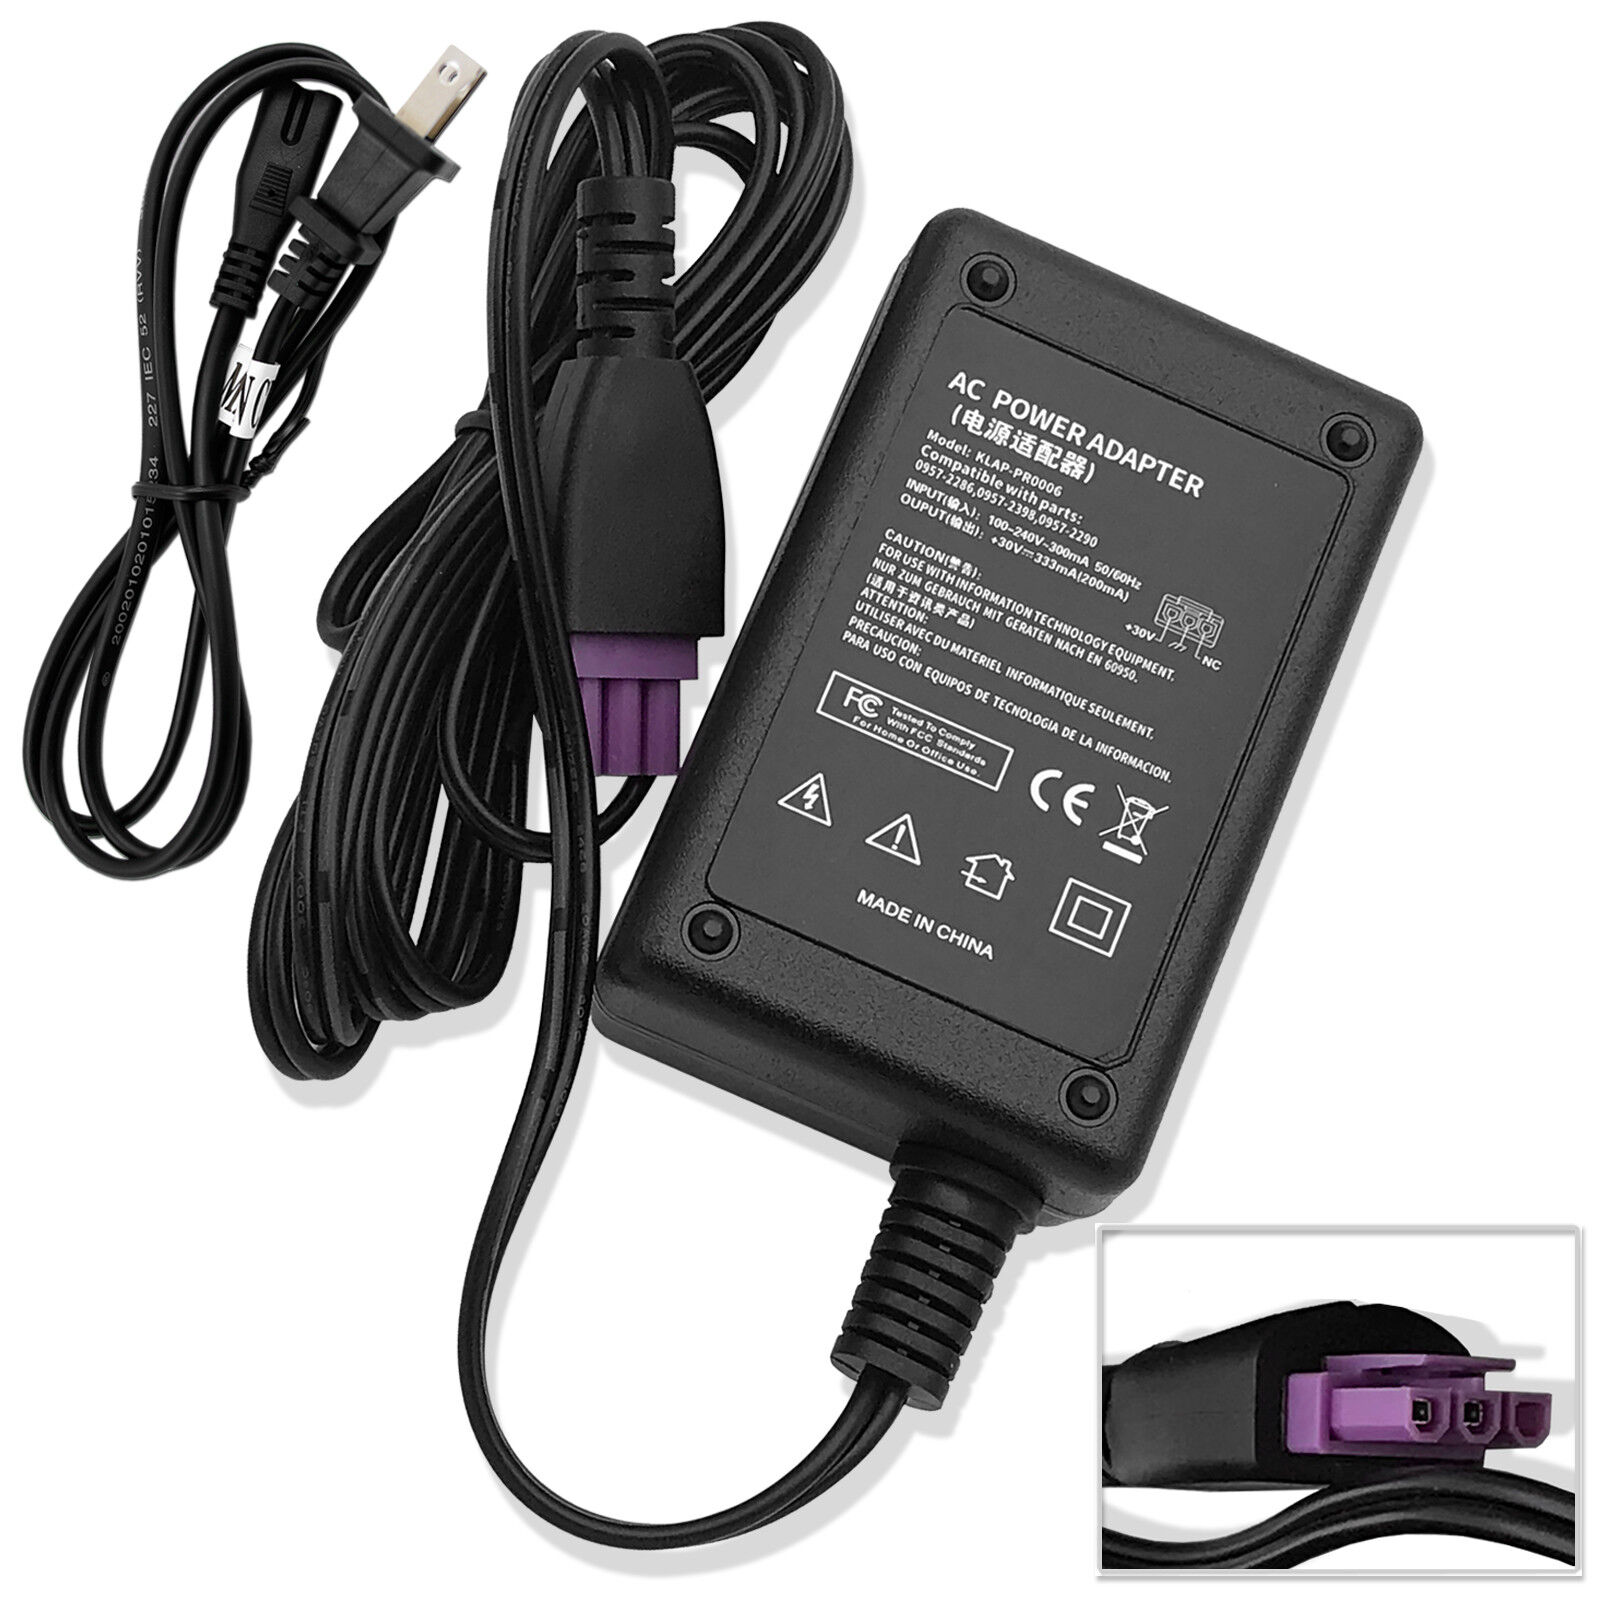 AC Adapter Charger Power Cord For HP Deskjet 1000 1050 1051 1055 1056 Printer